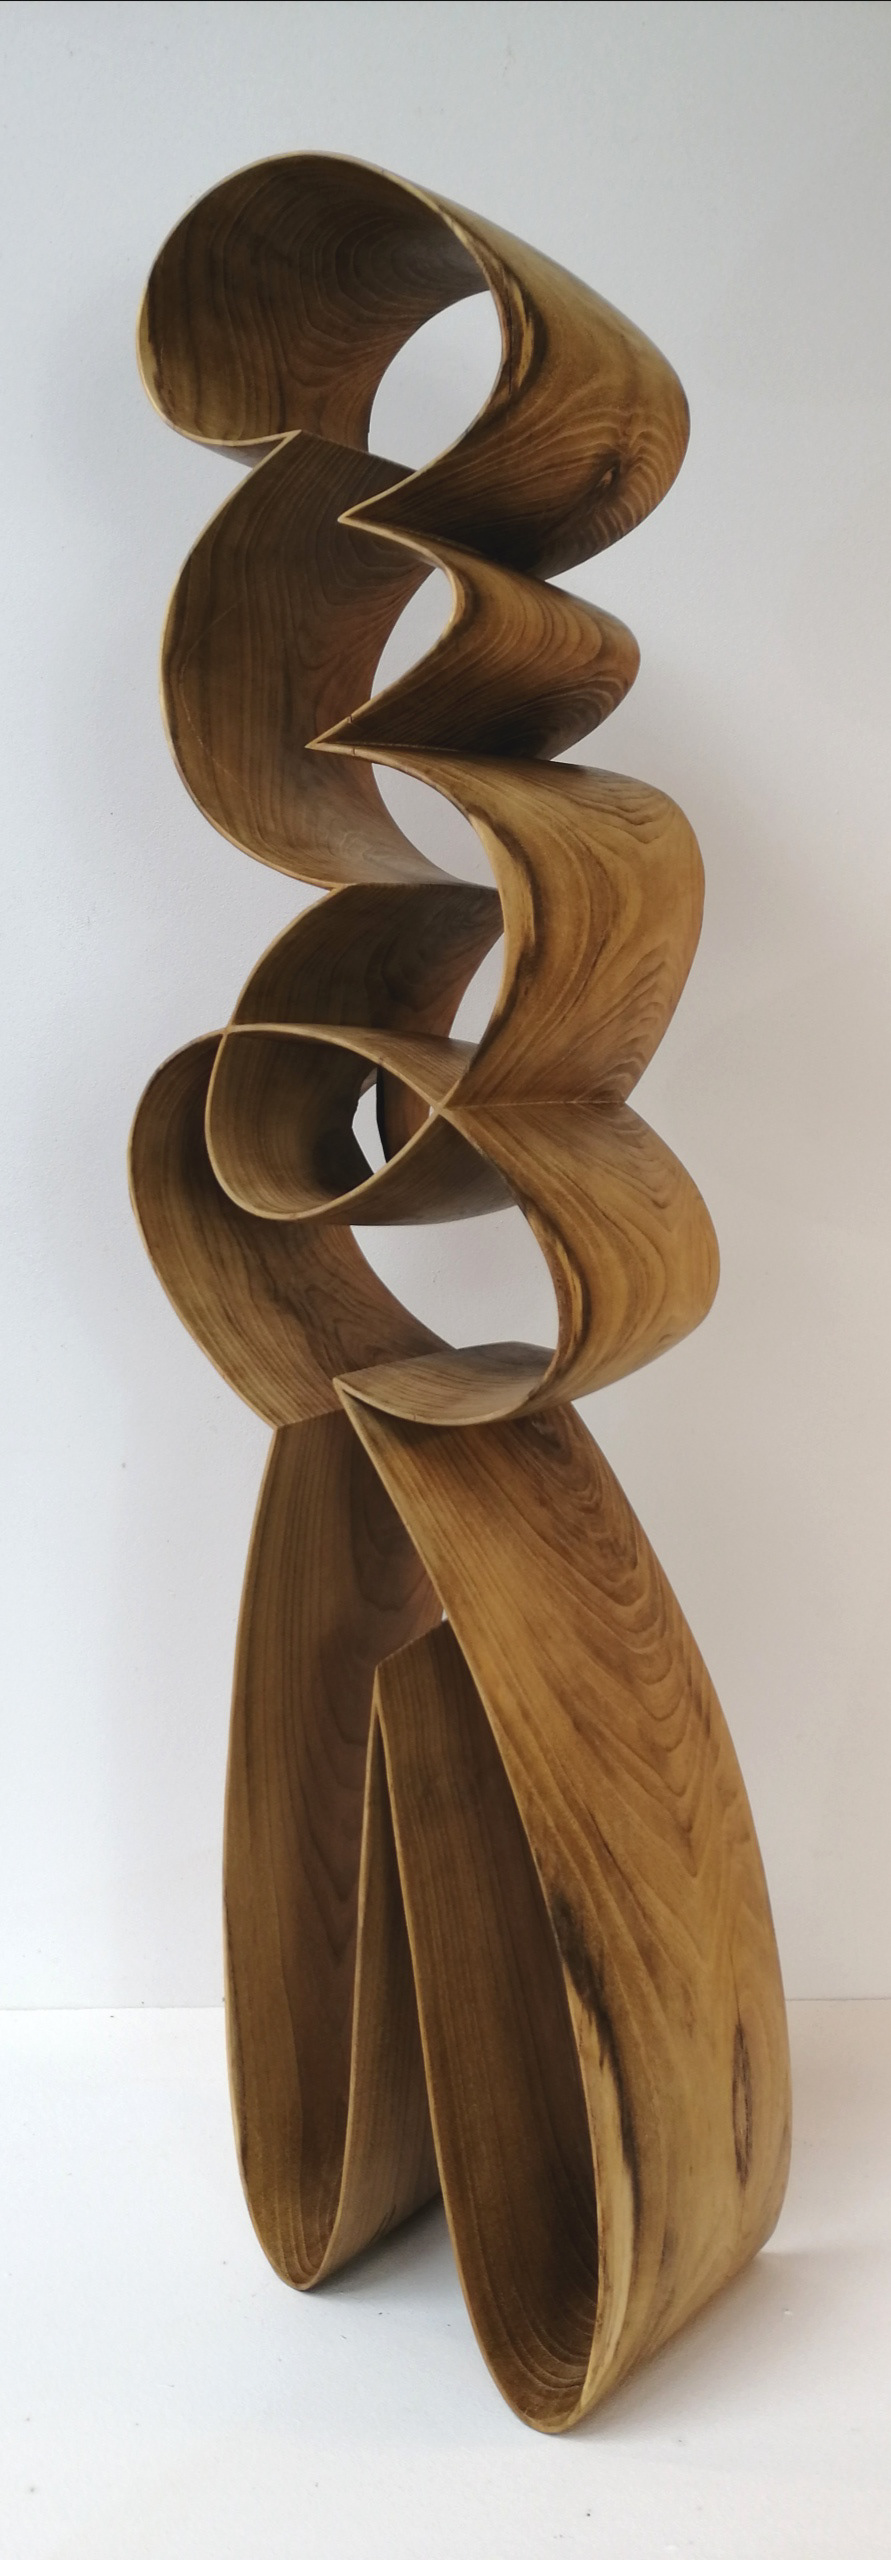 art contemporary Fusta  madera sculpture wood woodcarving woodworking xavipuente